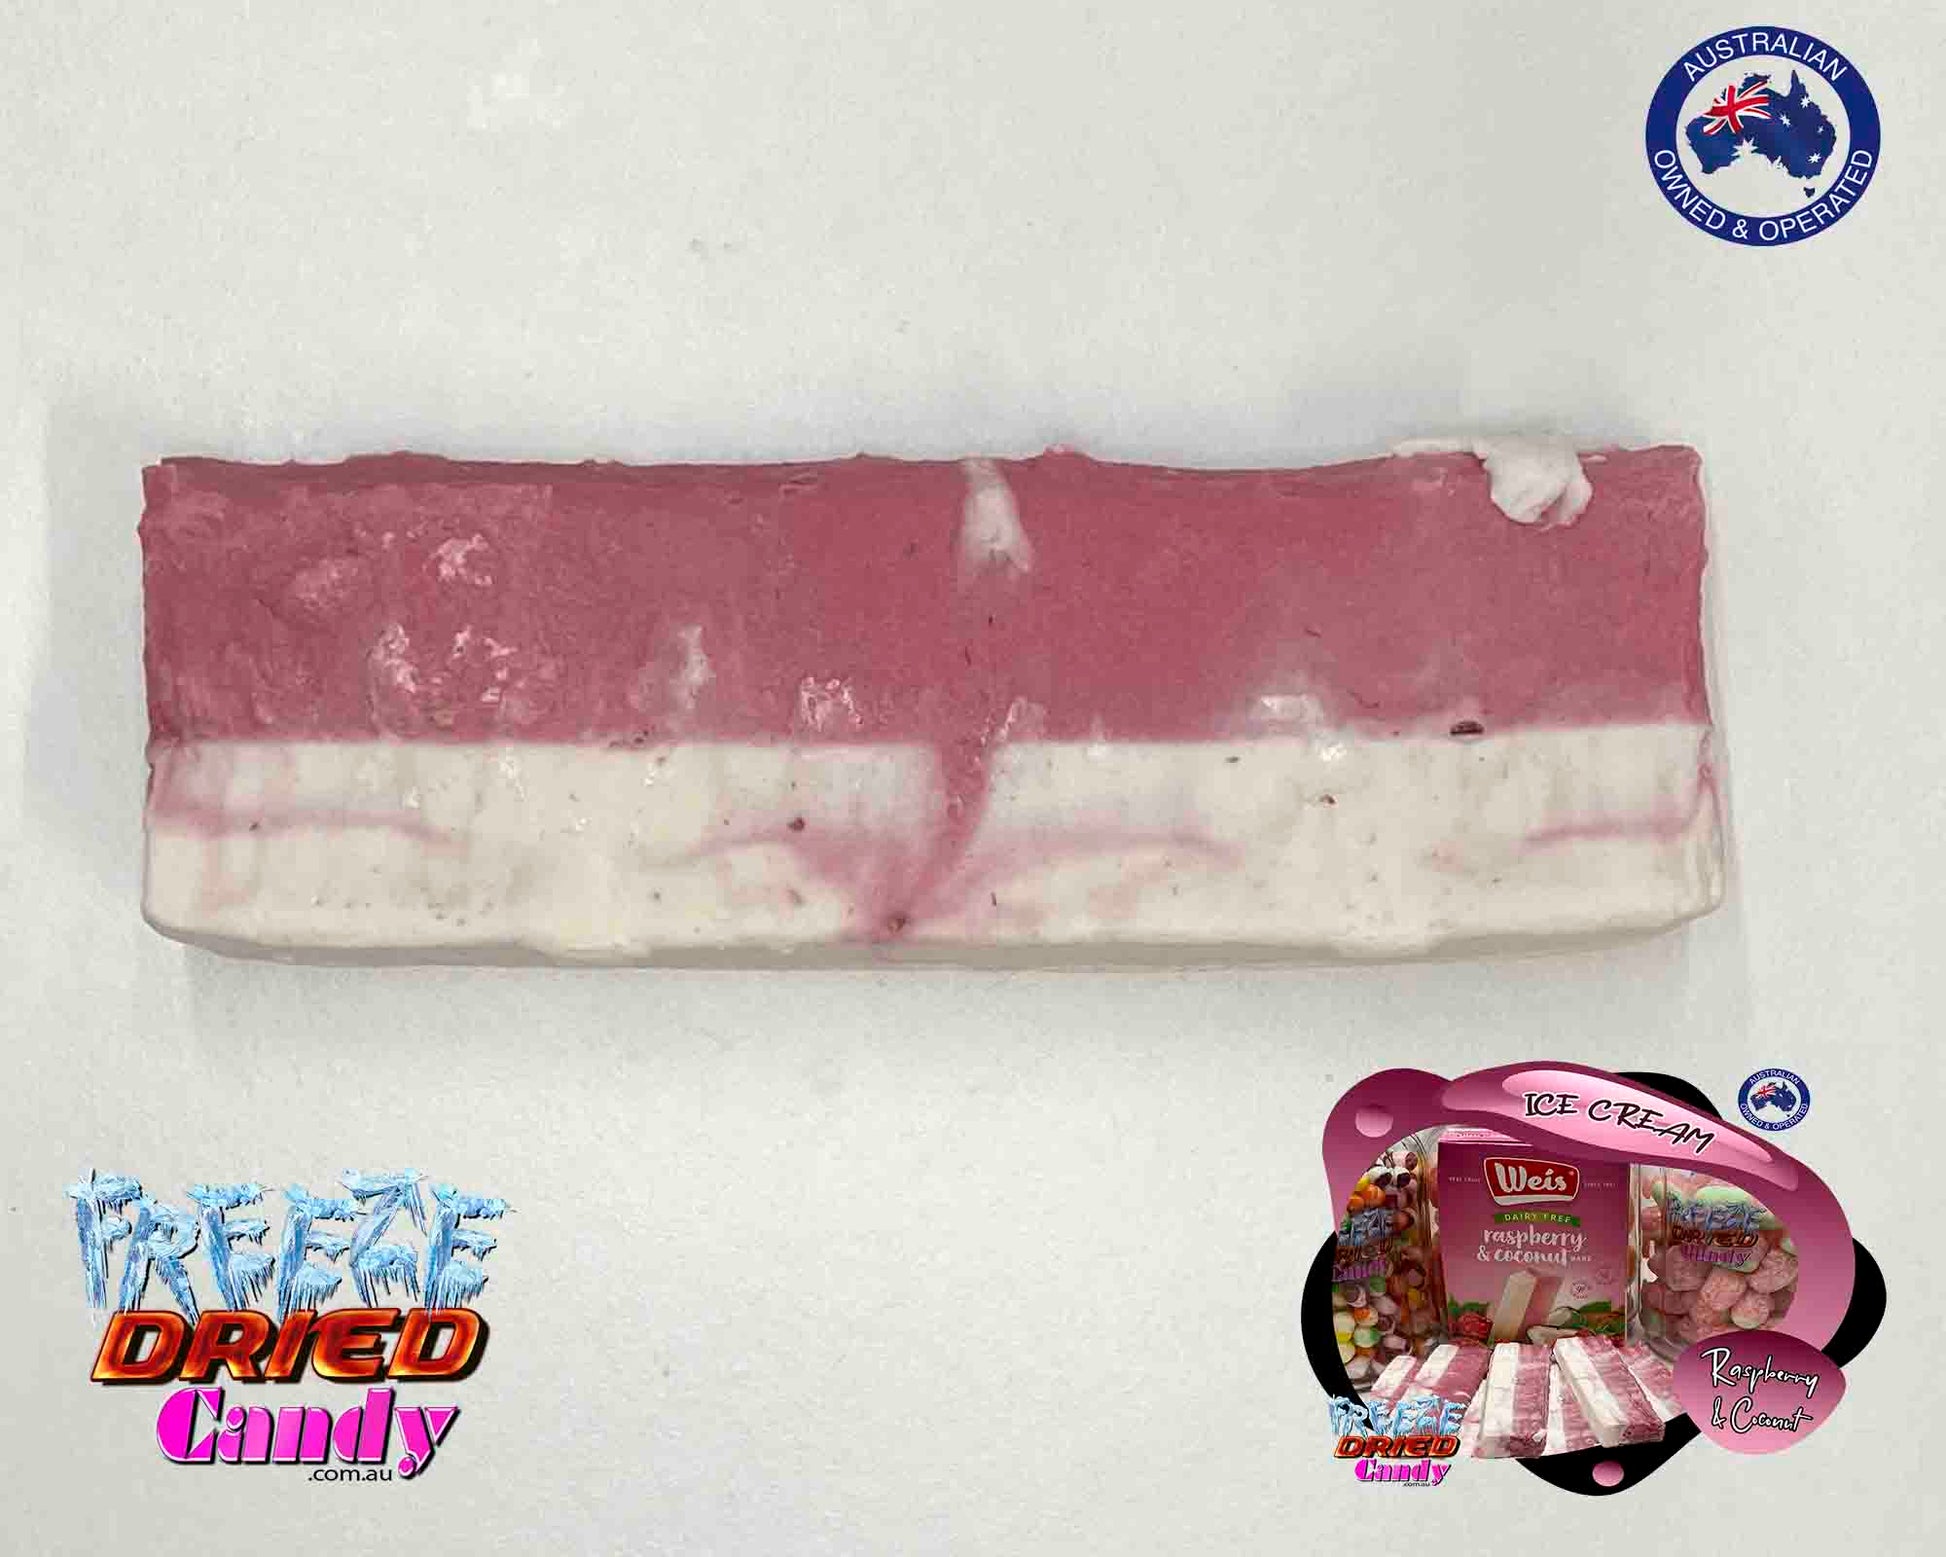 Freeze Dried Ice Cream WEIS® Bar -Raspberry & Coconut Weis Raspberry & Coconut bar is so unique, authentic, and perfectly balanced by a layer of traditional Weis ice cream. One bite and you're sure to be delighted. Fruit and cream are soulmates. Put them together with delicious natural ingredients, and you’ve got heaven in a Weis Bar. The two-toned Classic Weis Bars, a moreish combination of real fruit and their traditional cream strip, are an irresistible indulgence.